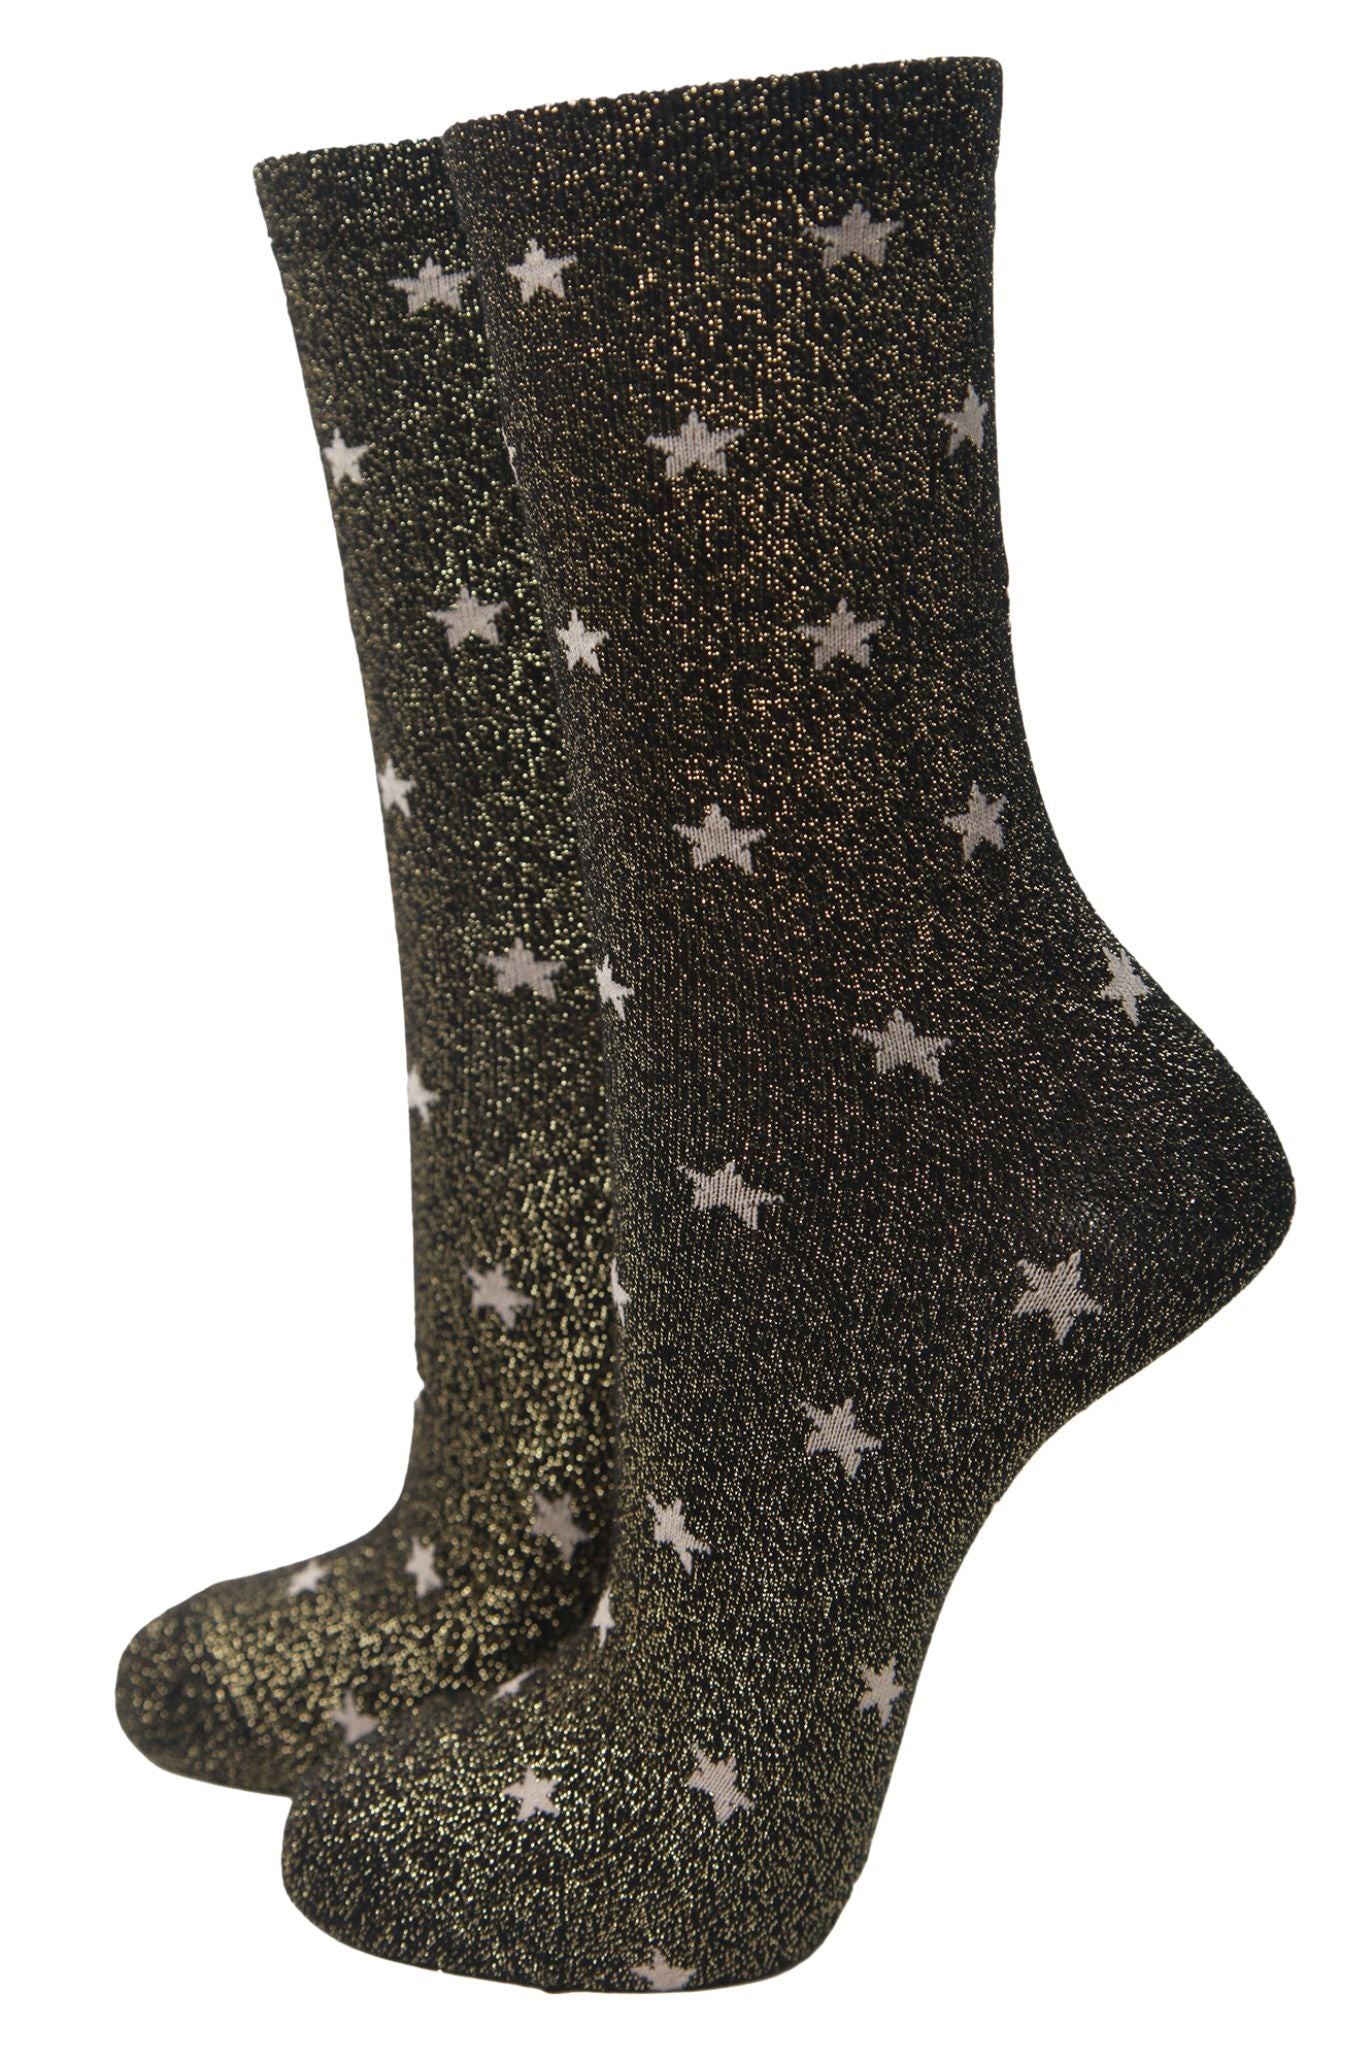 gold and black glitter ankle socks with an all over gold star pattern